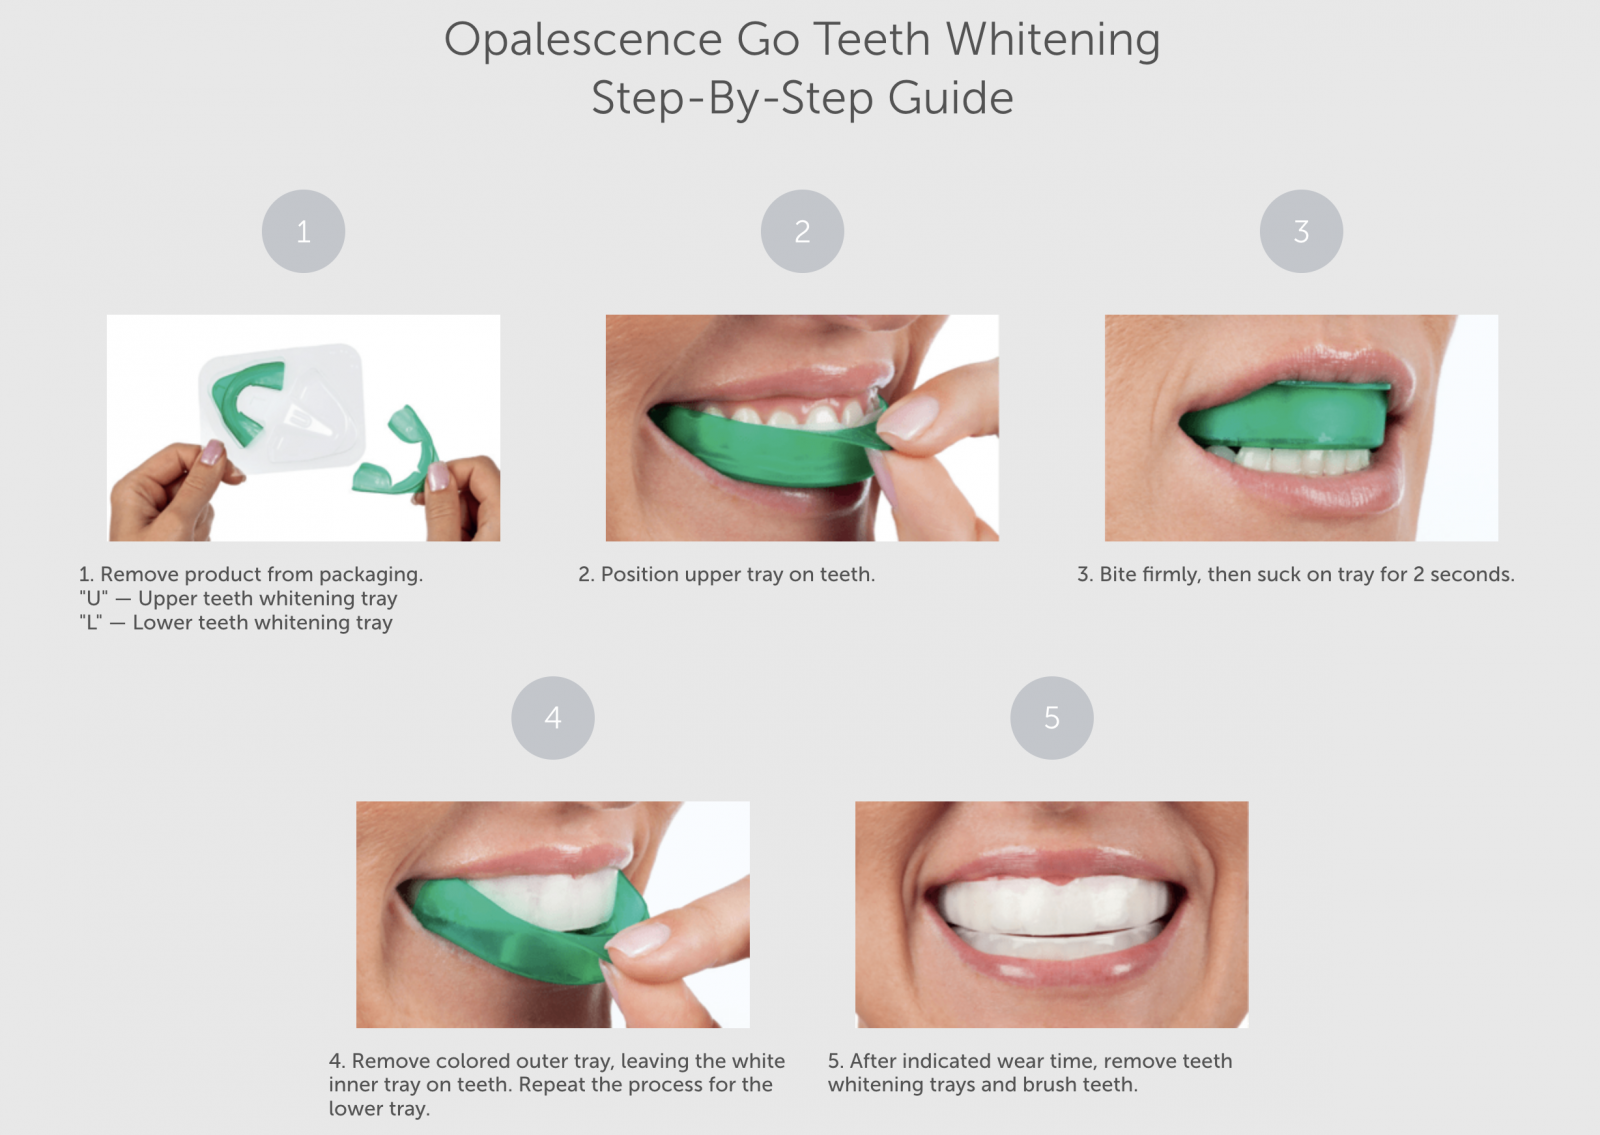 How to Use Opalescence Go Professional Teeth Whitening 